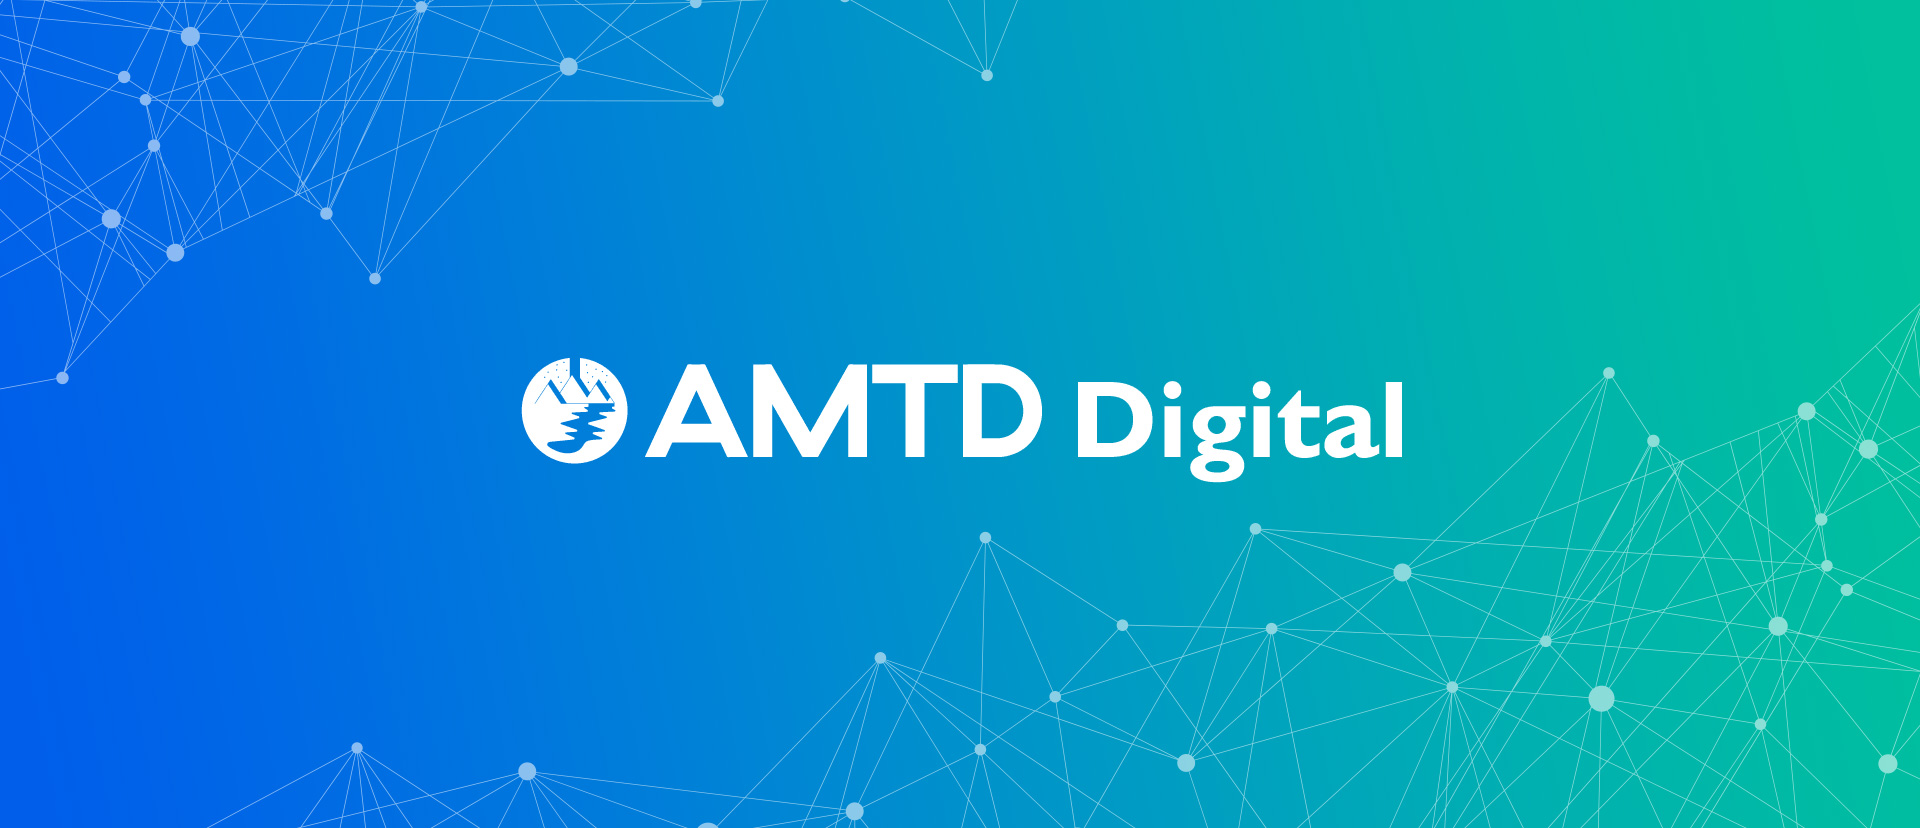 Why Have AMTD Digital Stocks Grown by 19,550%